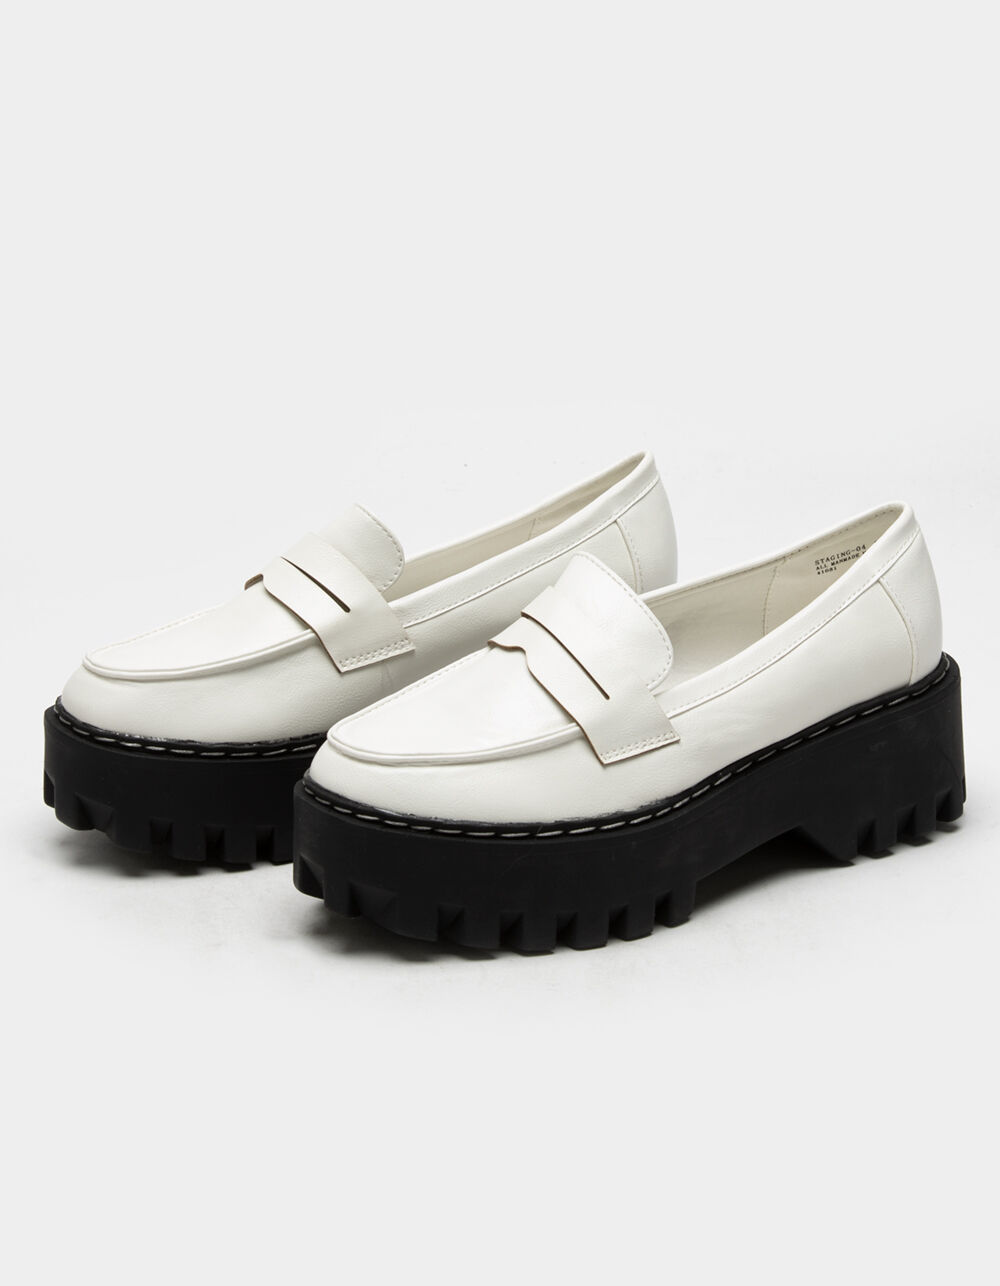 BAMBOO Crinkle Patent Loafer Womens Platform Shoes - WHITE | Tillys